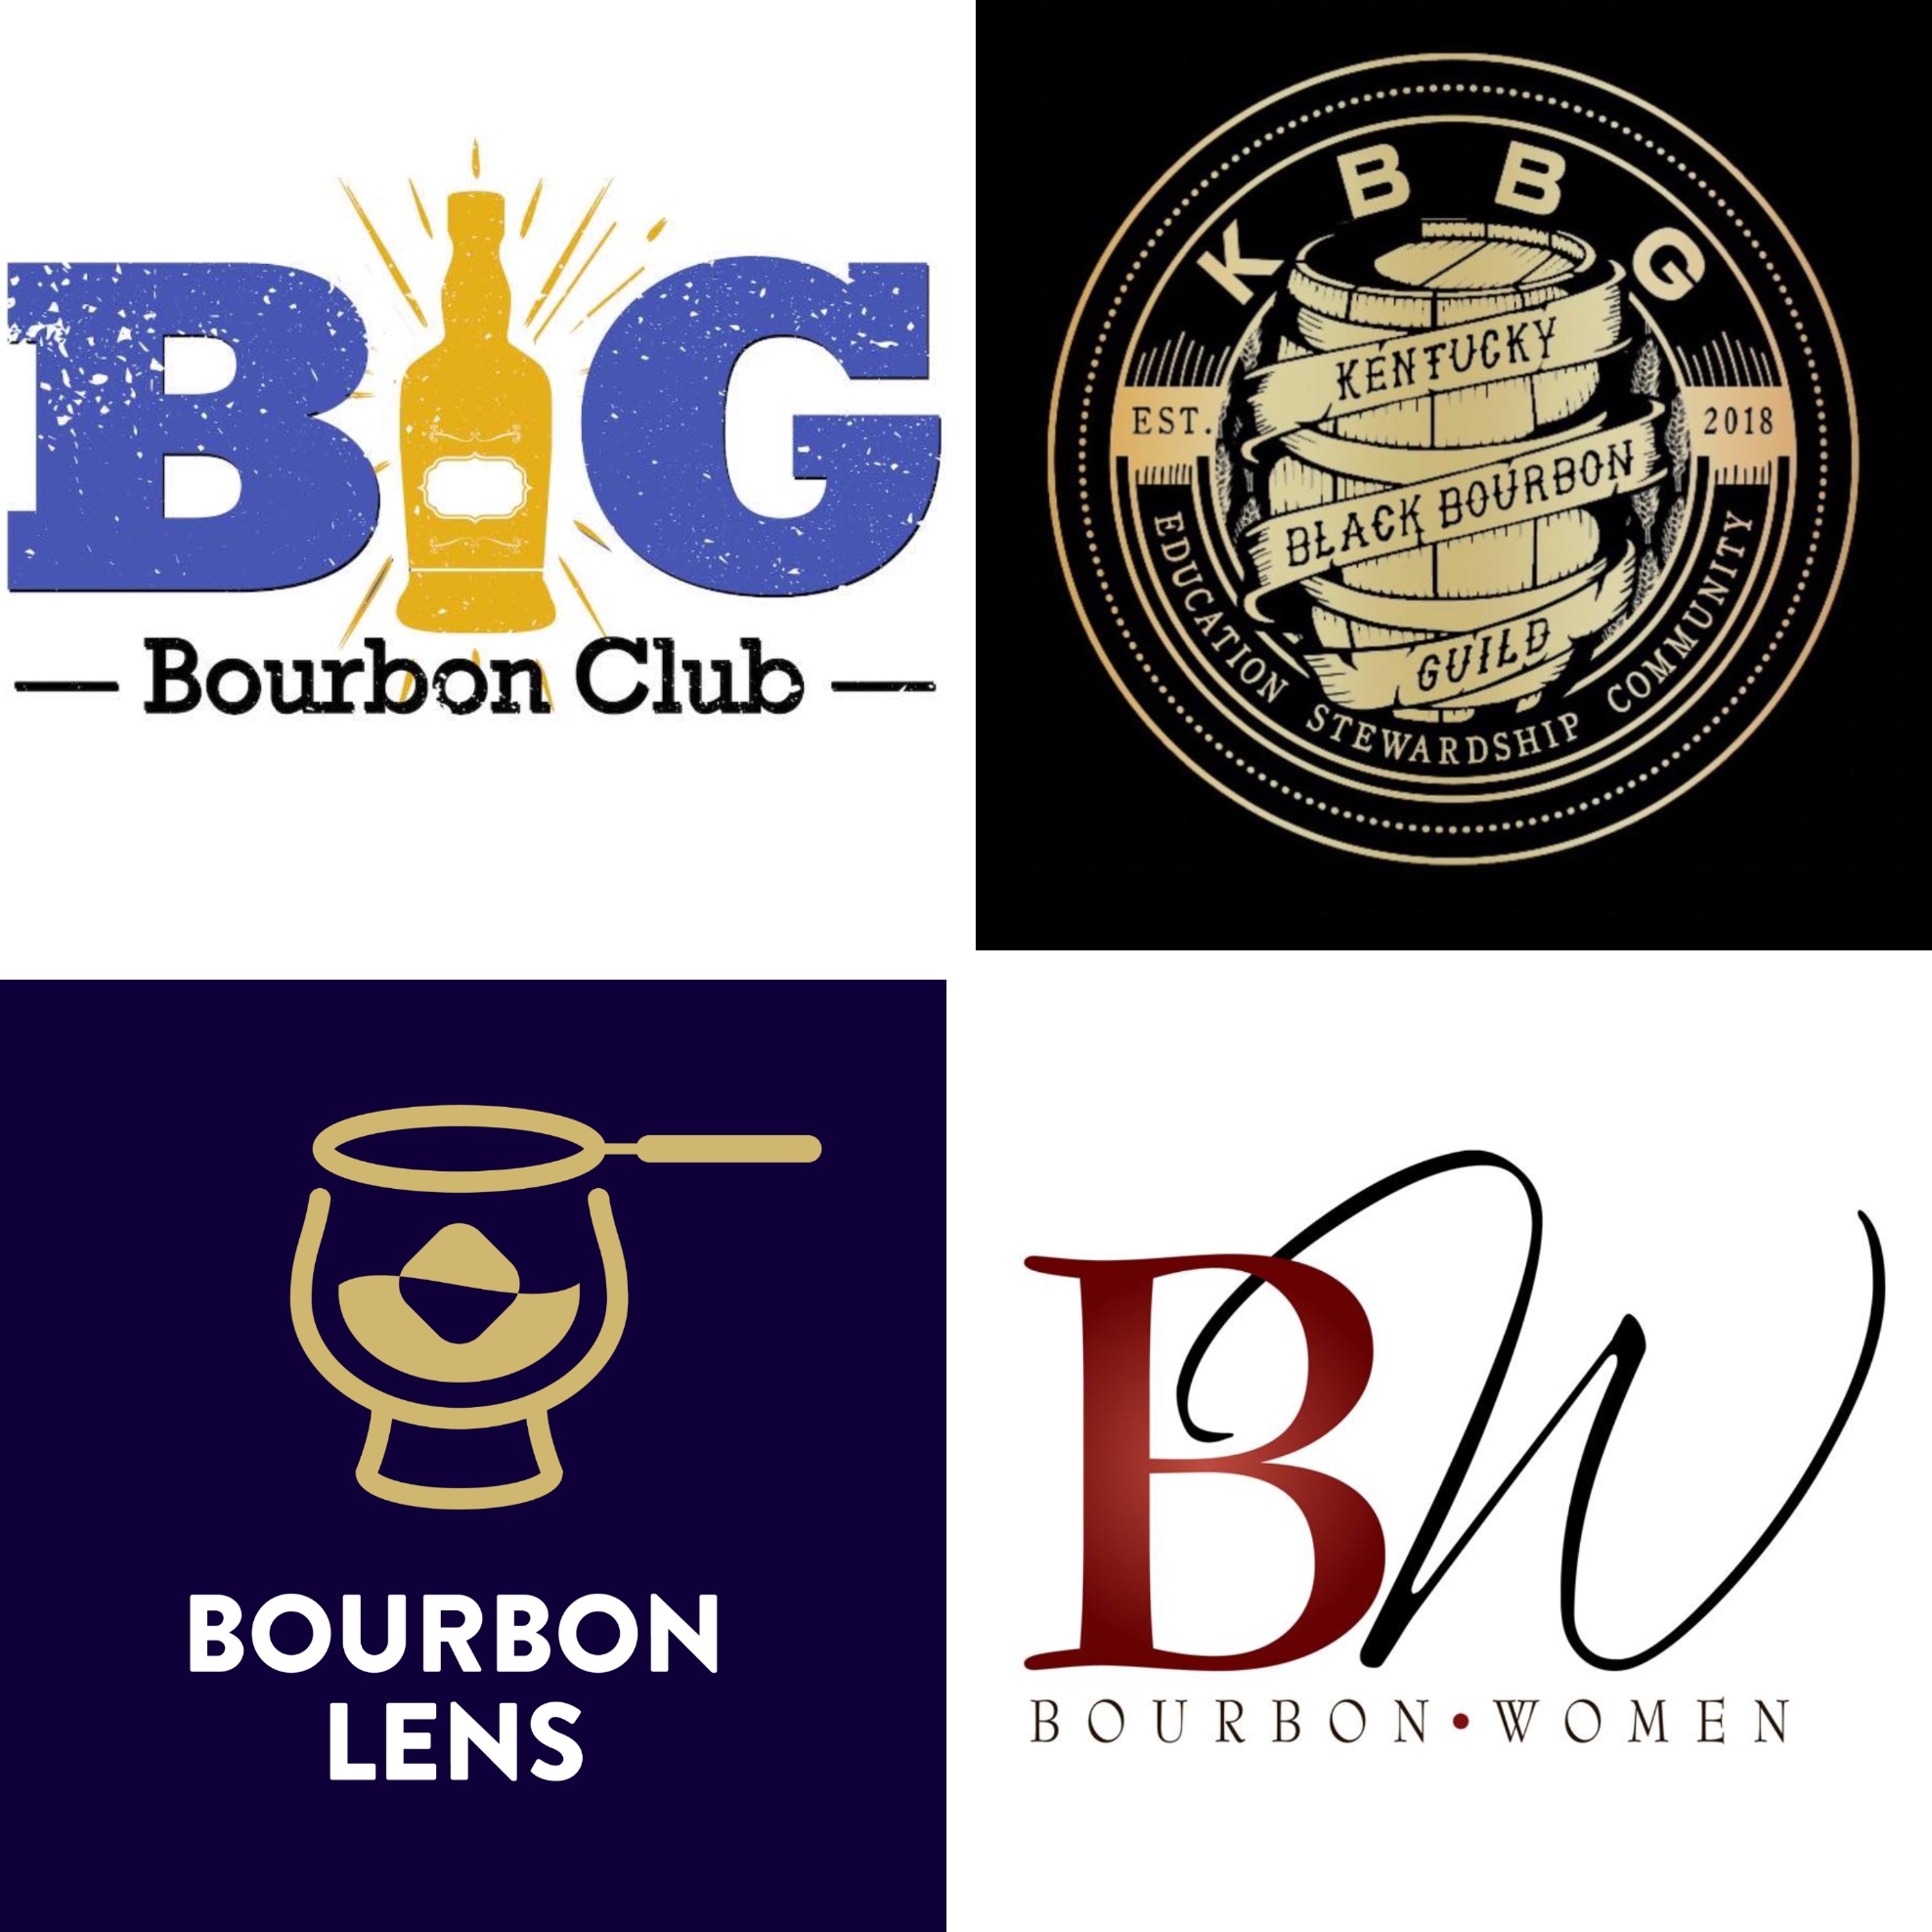 214: Diversity & Inclusion in Bourbon: Roundtable Discussion